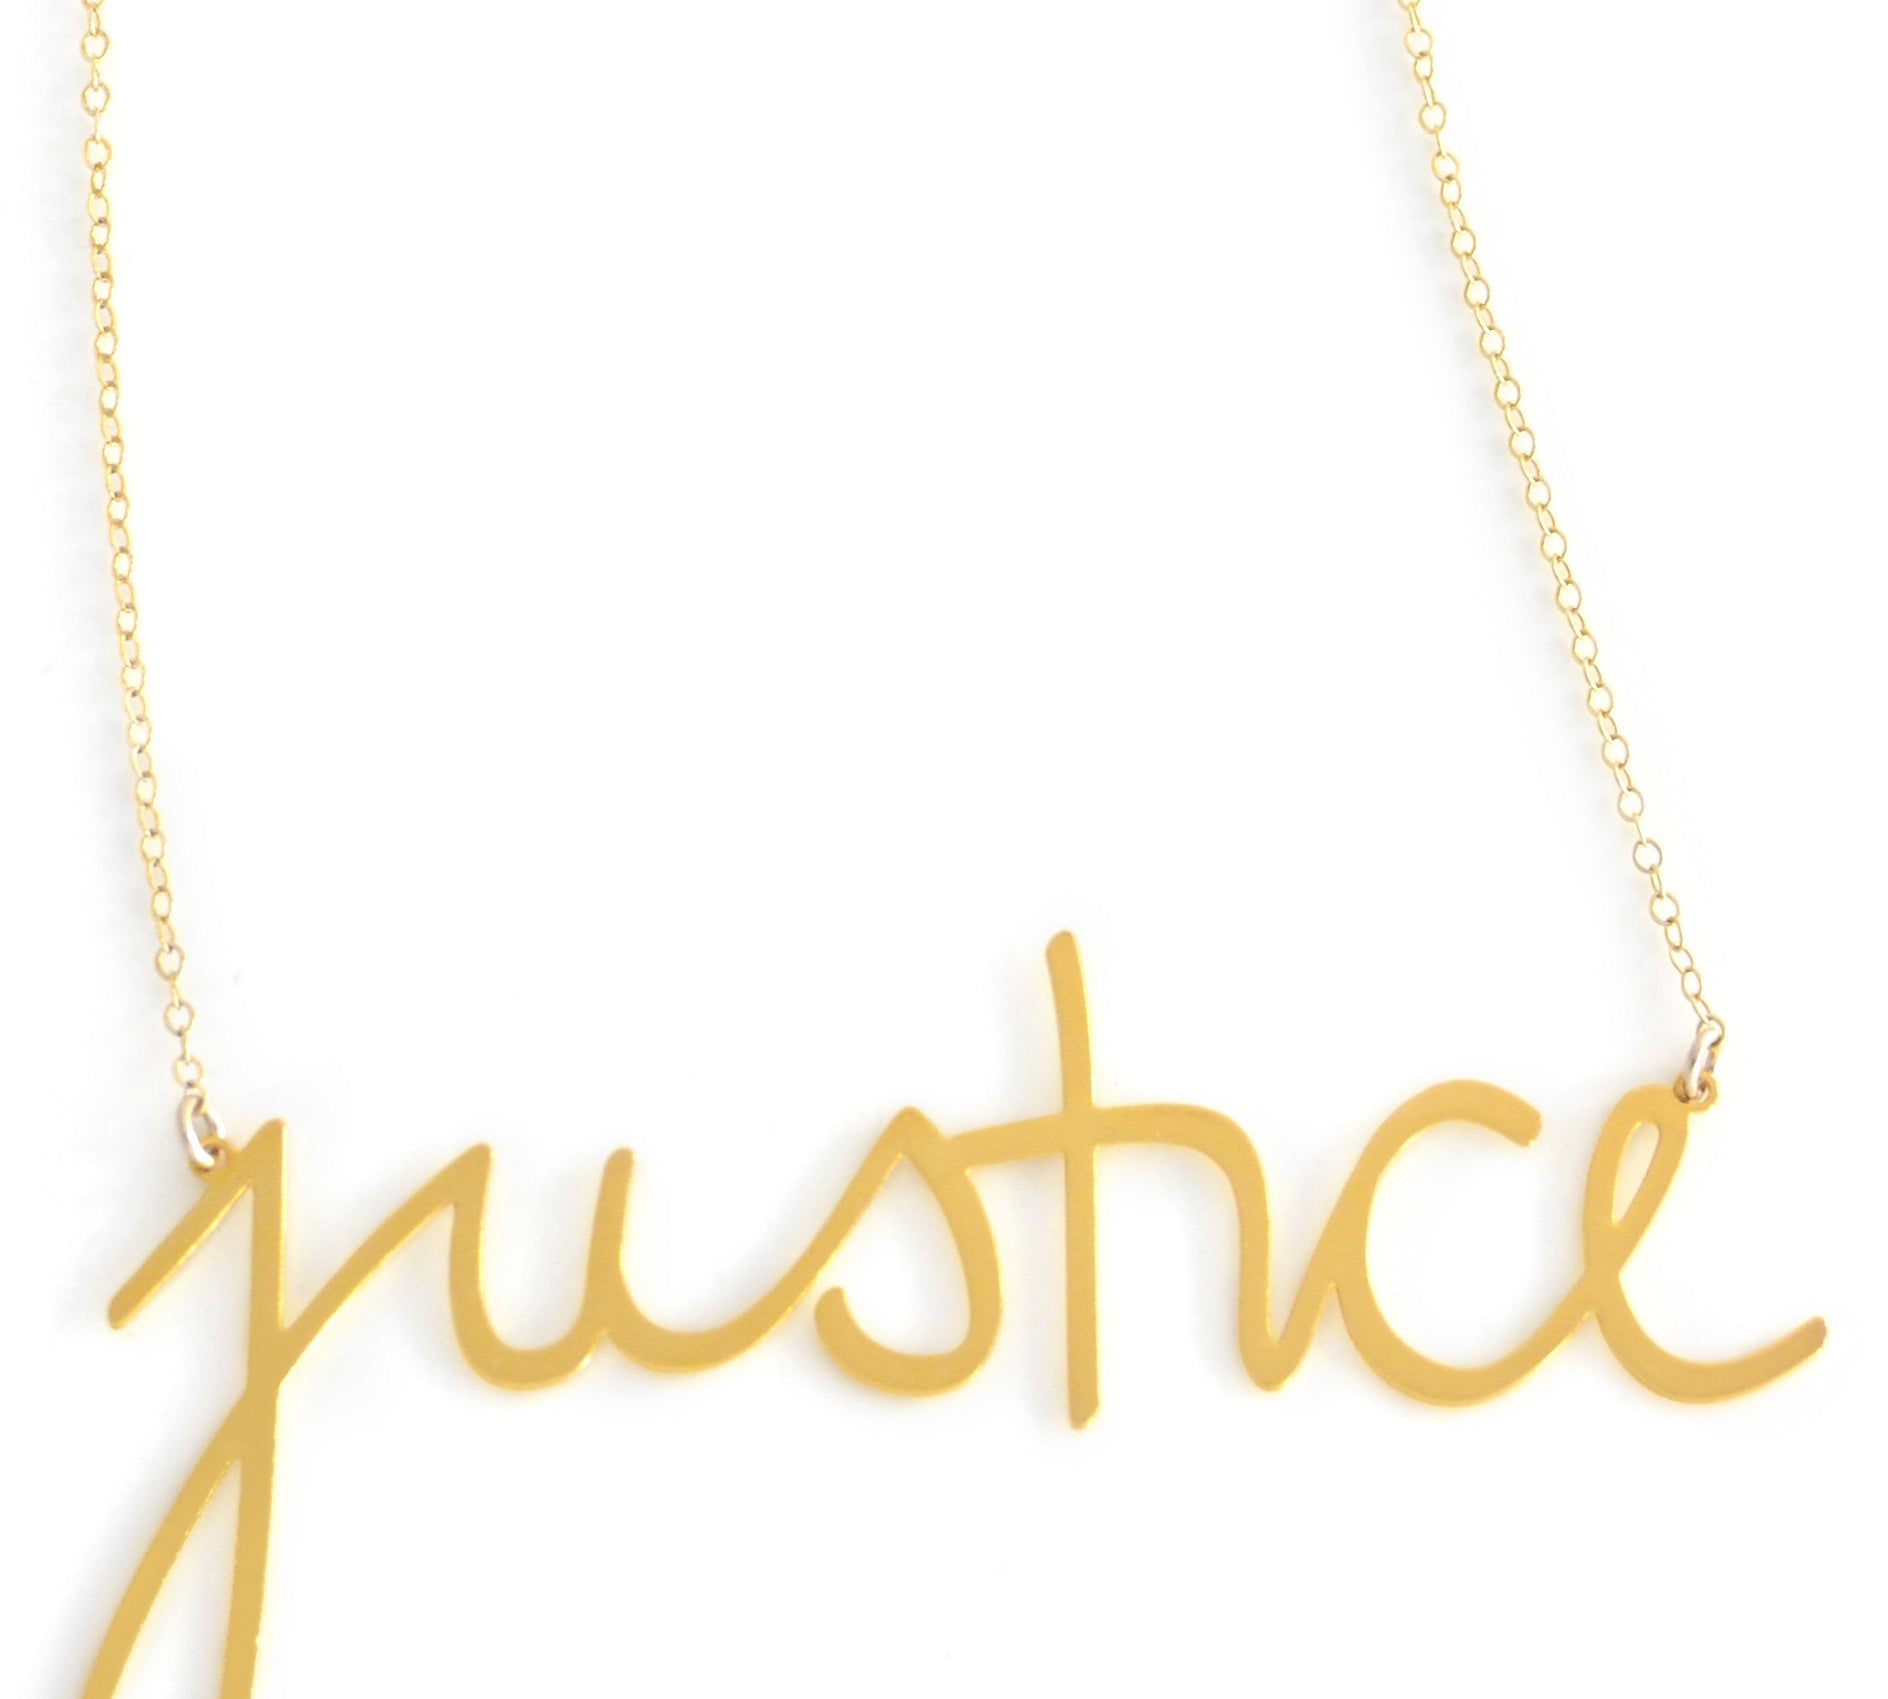 Justice Necklace - High Quality, Affordable, Hand Written, Empowering, Self Love, Mantra Word Necklace - Available in Gold and Silver - Small and Large Sizes - Made in USA - Brevity Jewelry